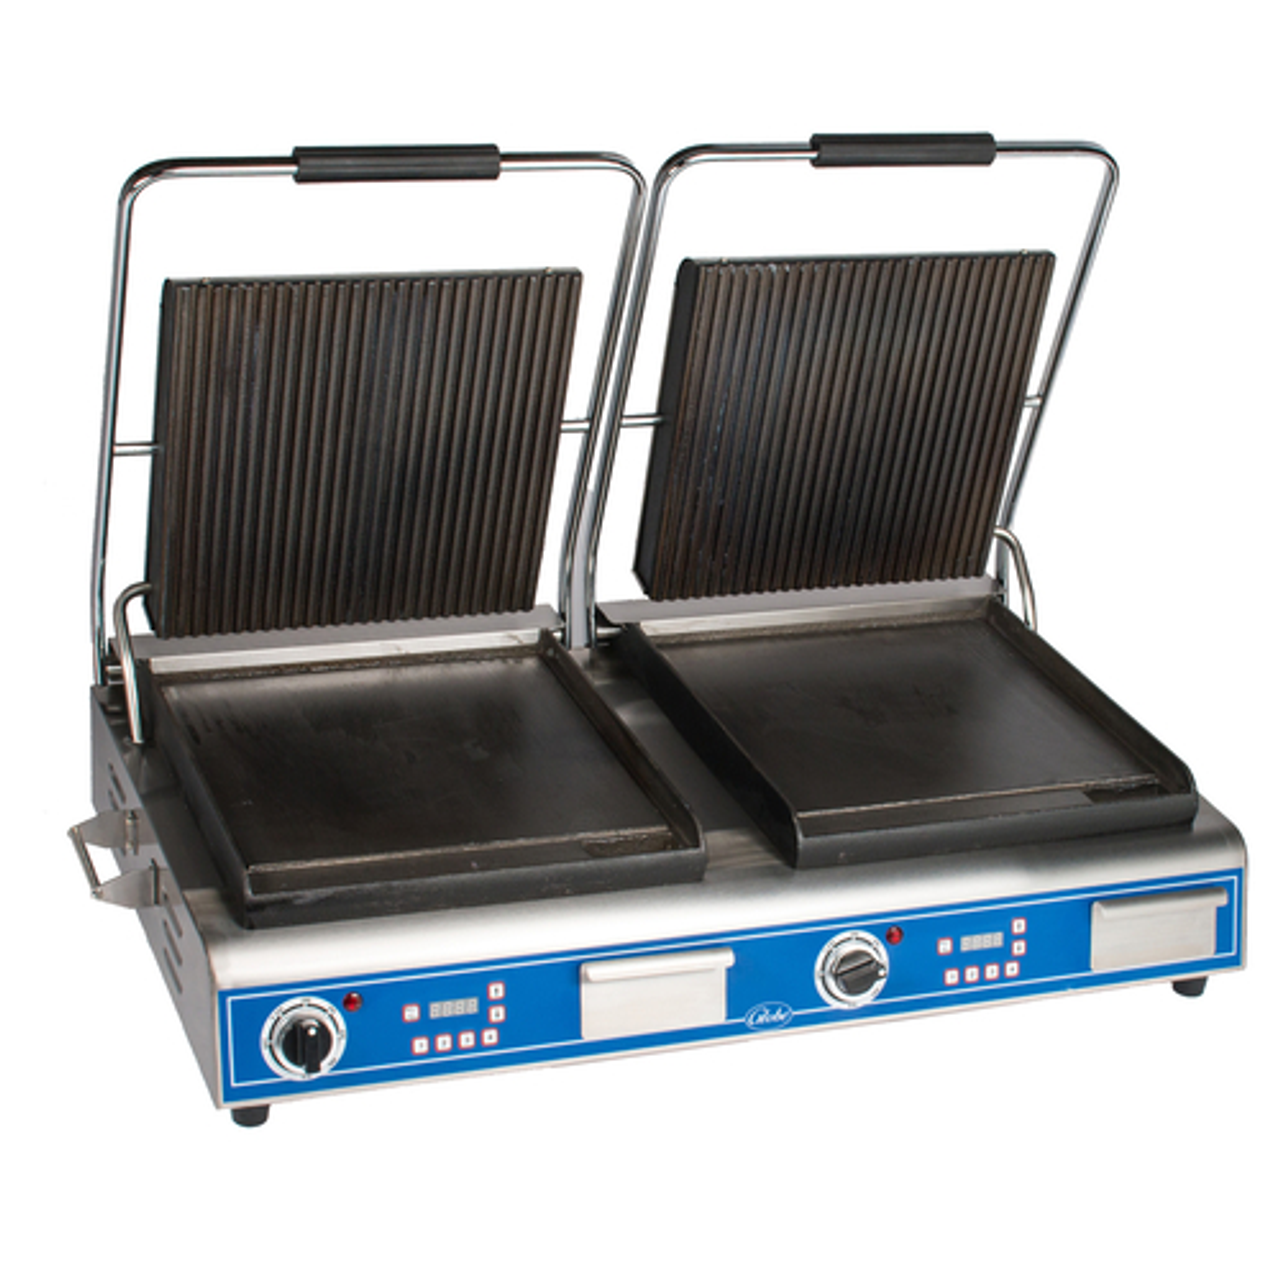 Sandwich/Panini Grill, double, countertop, electric, grooved top/smooth bottom, (2) 14" plates GPGSDUE14D